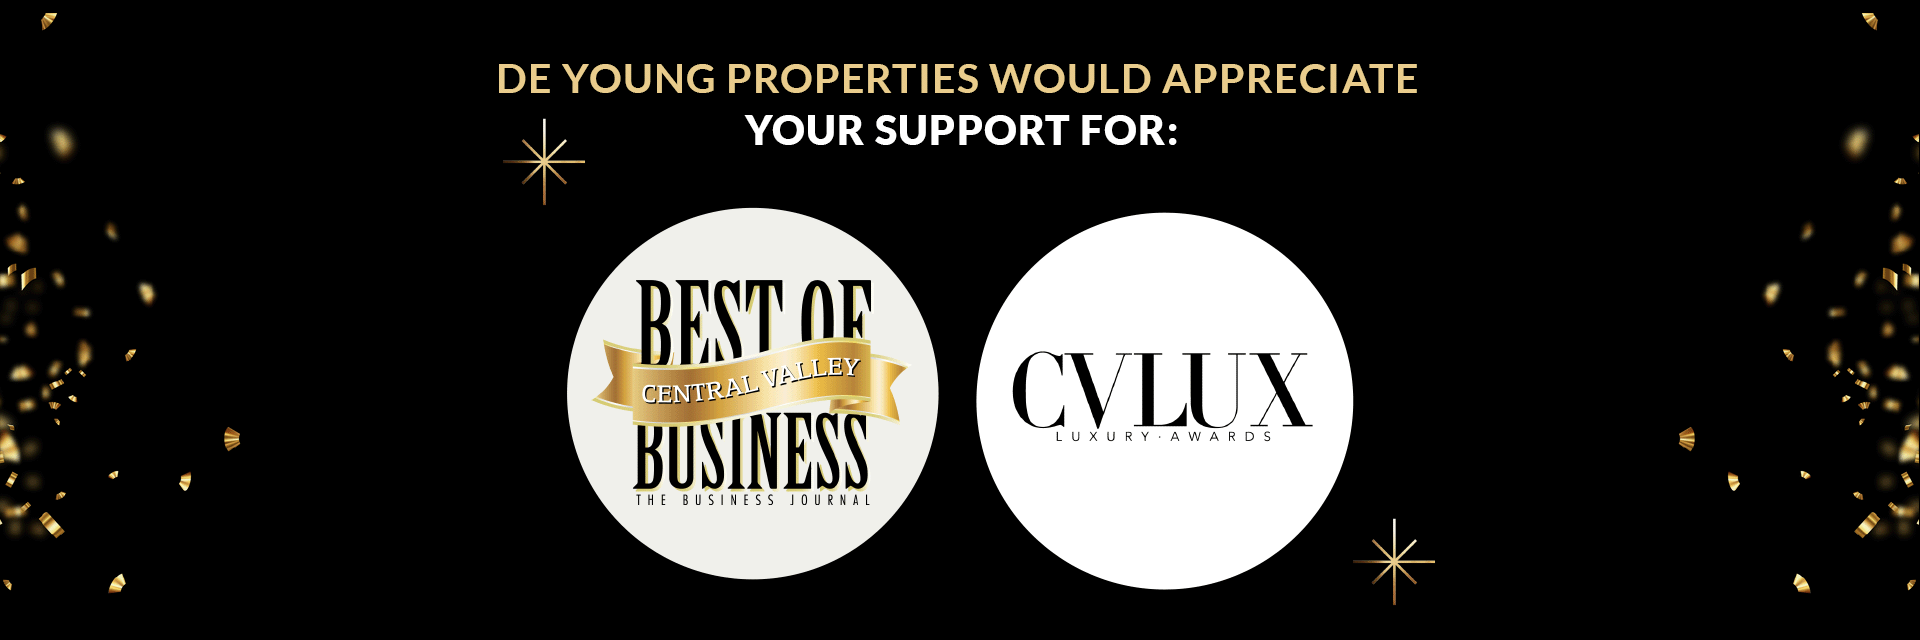 De Young Properties Would Appreciate Your Support! Cast Your Vote Today!